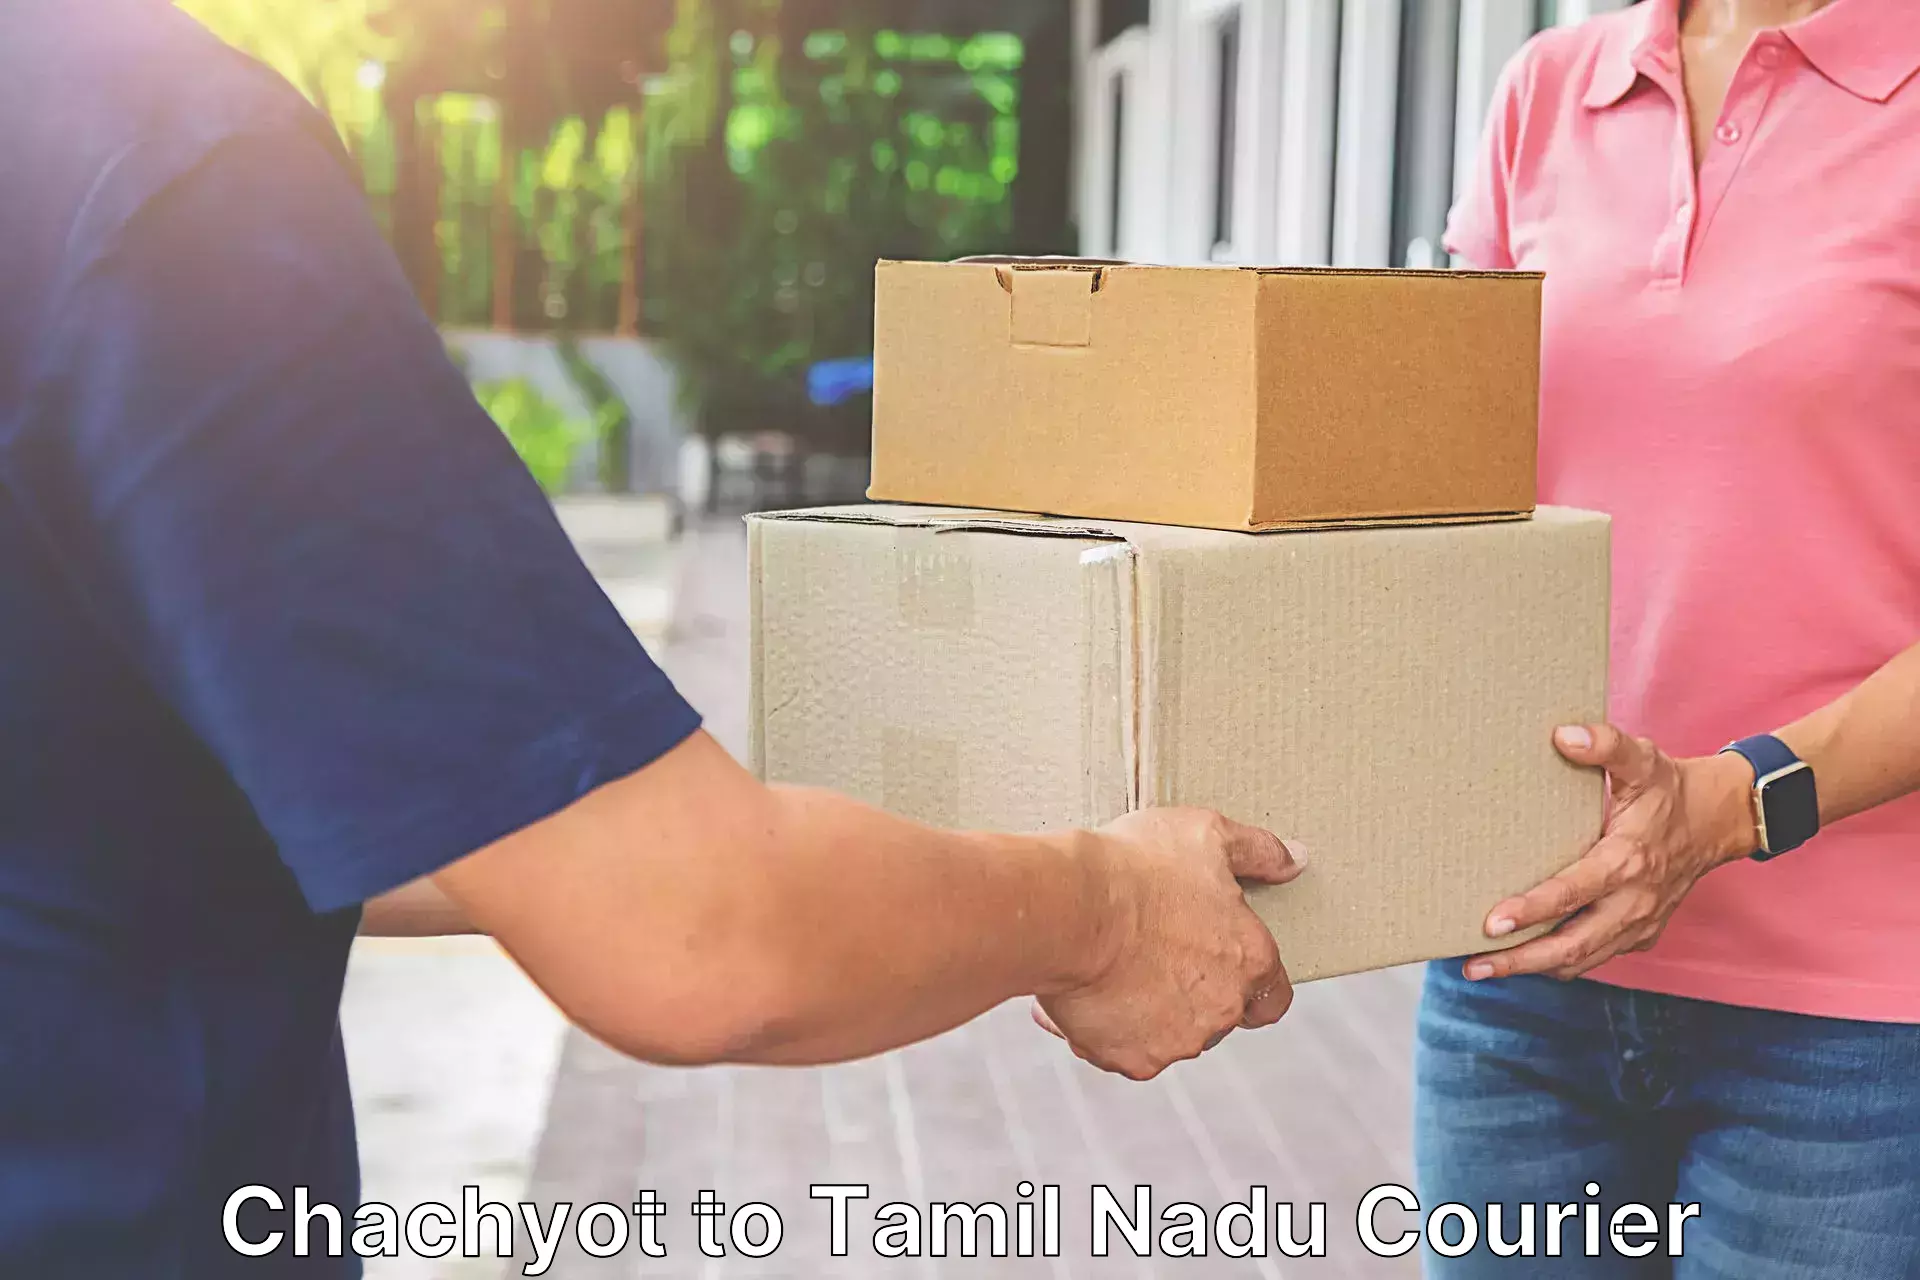 International courier networks Chachyot to Ennore Port Chennai